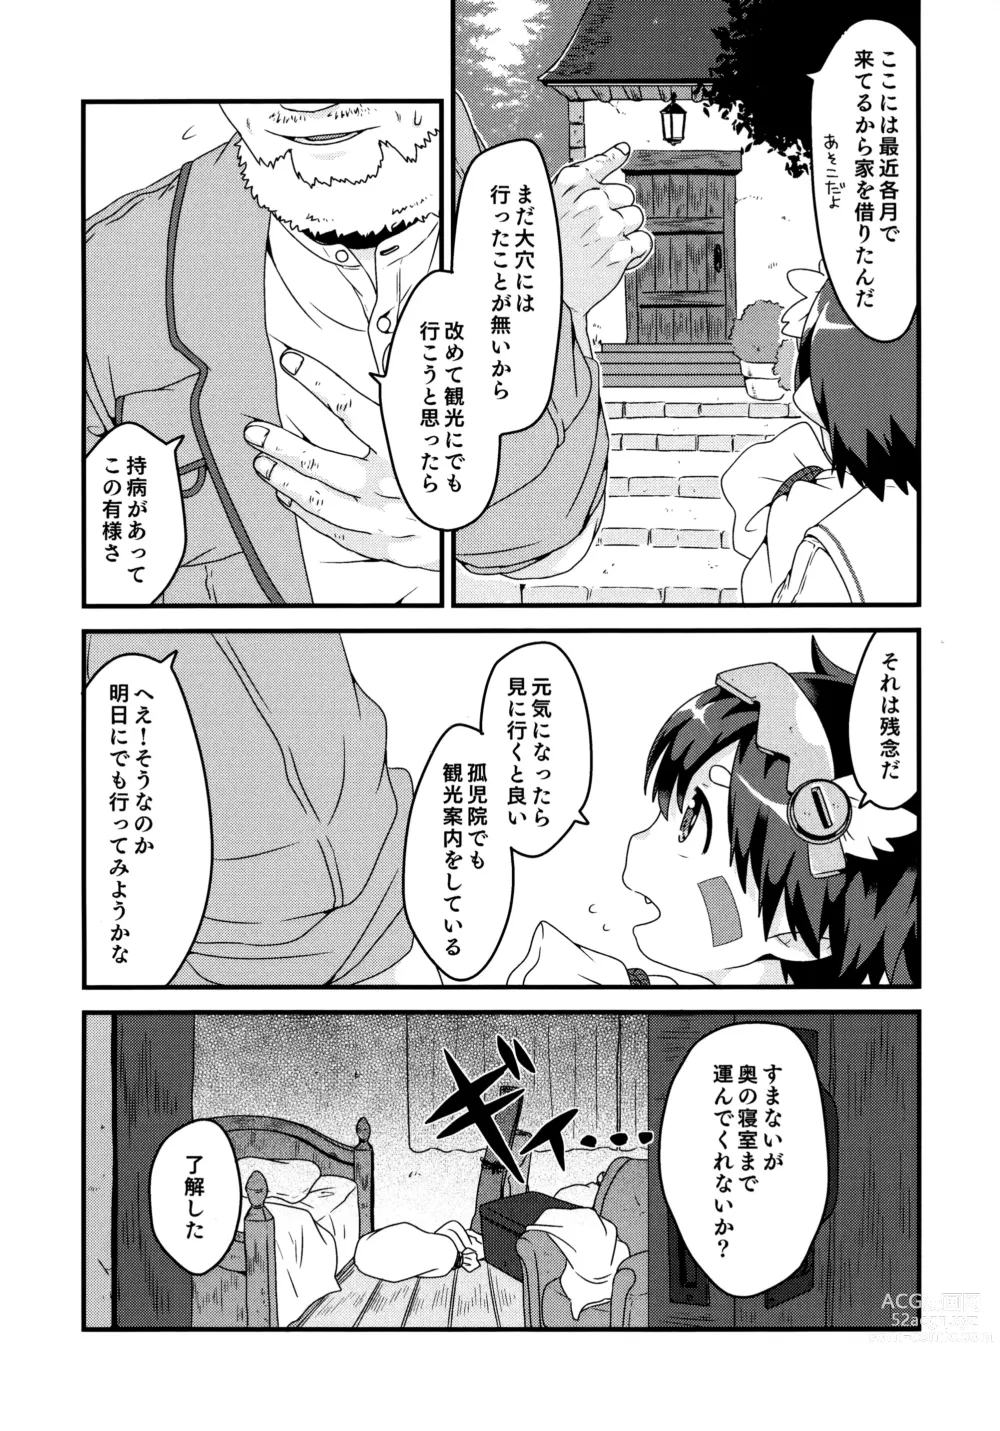 Page 7 of doujinshi Do Aubades Dream of Electric Sheep?